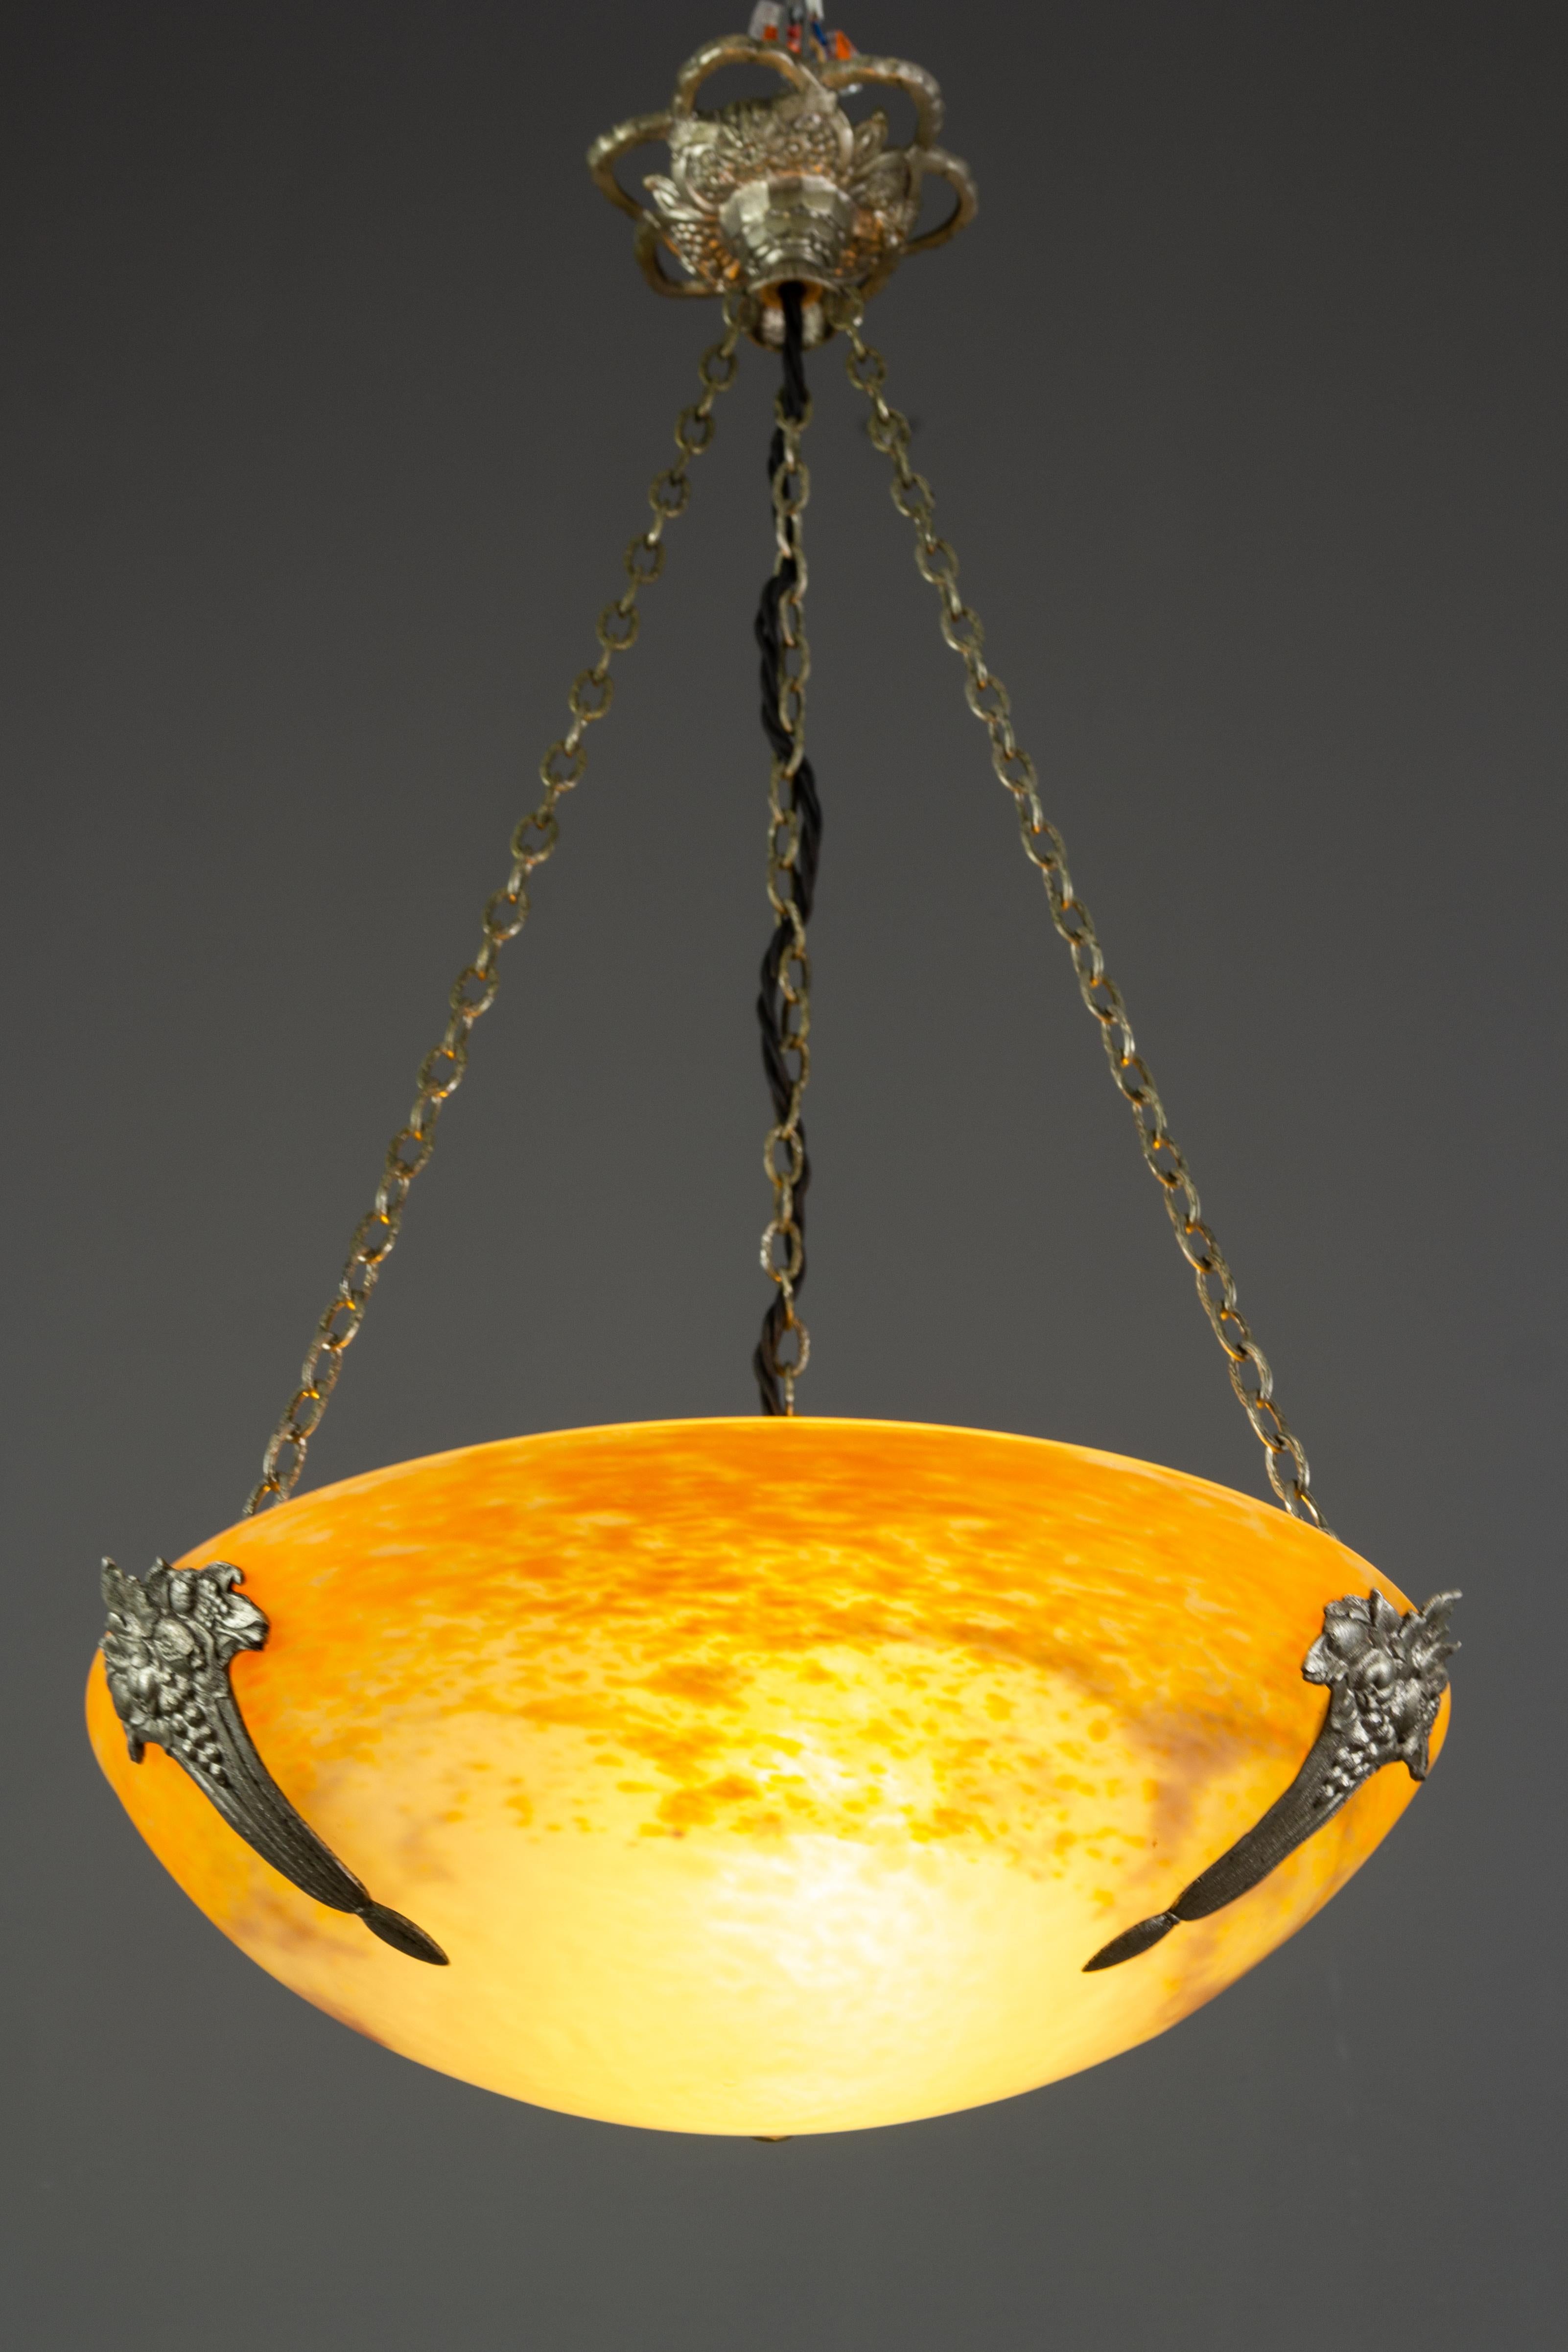 This adorable French Art Deco period pendant chandelier features a mottled “Pâte de Verre” art glass bowl in yellow, lilac, and white color, signed ”Noverdy France” by Jean Noverdy, hung at an ornate brass and silver color bronze fixture with one